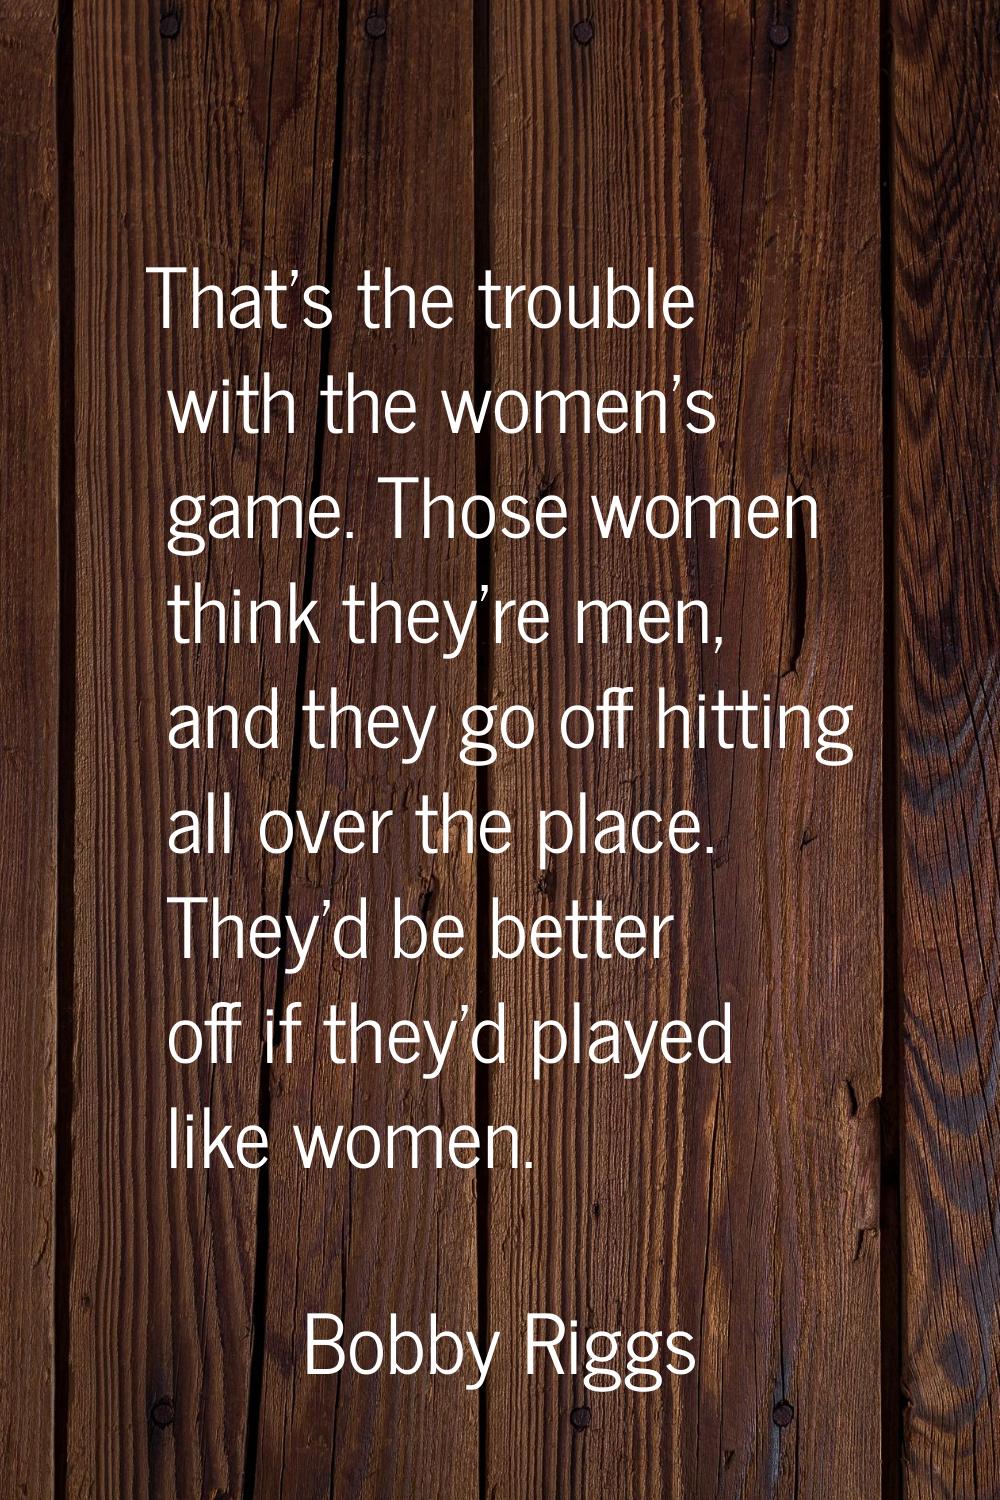 That's the trouble with the women's game. Those women think they're men, and they go off hitting al